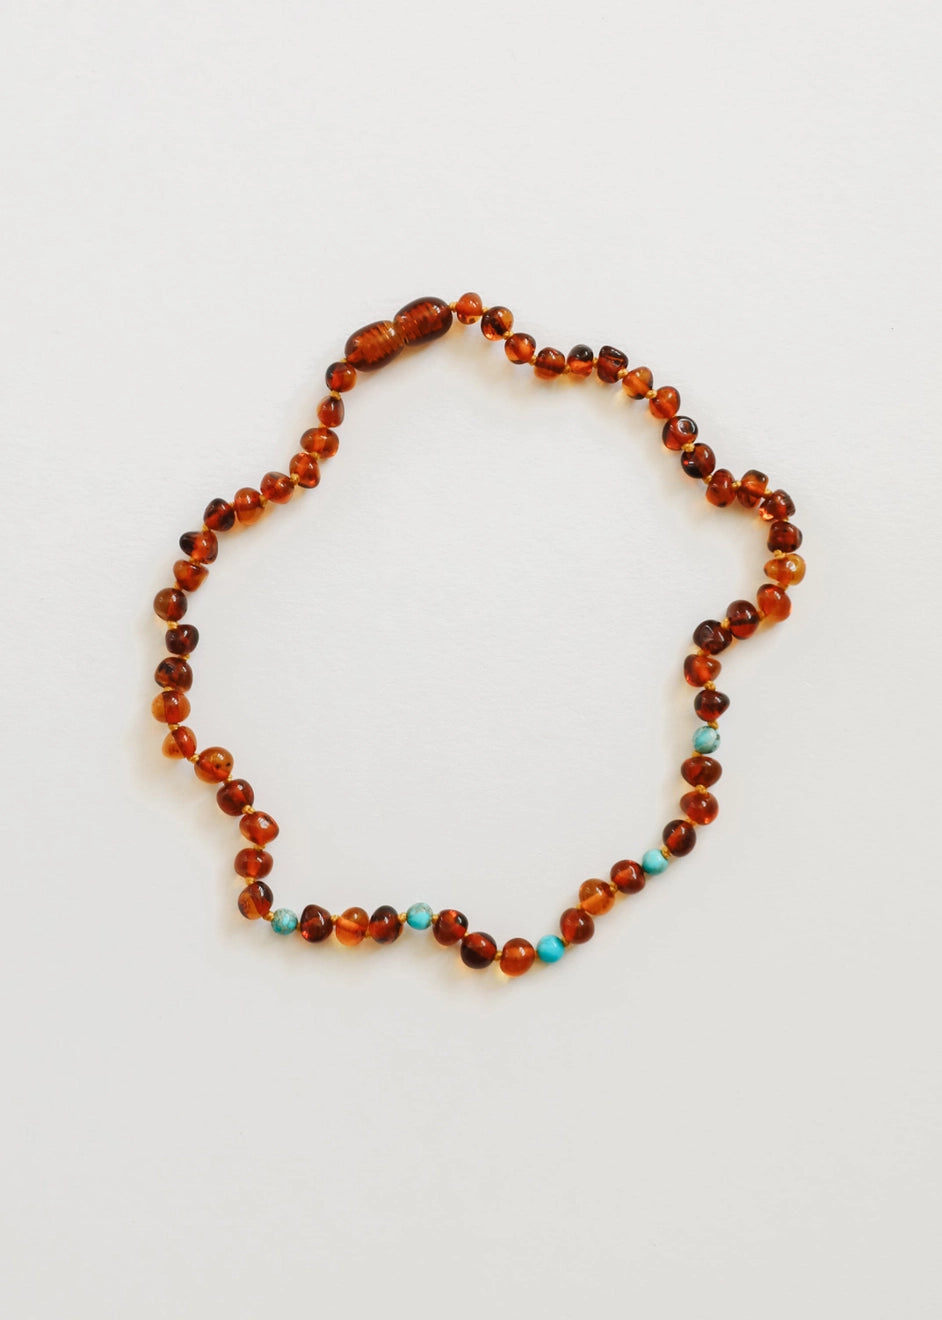 Cognac Baltic Amber and Natural Turquoise Baby Teething Necklace